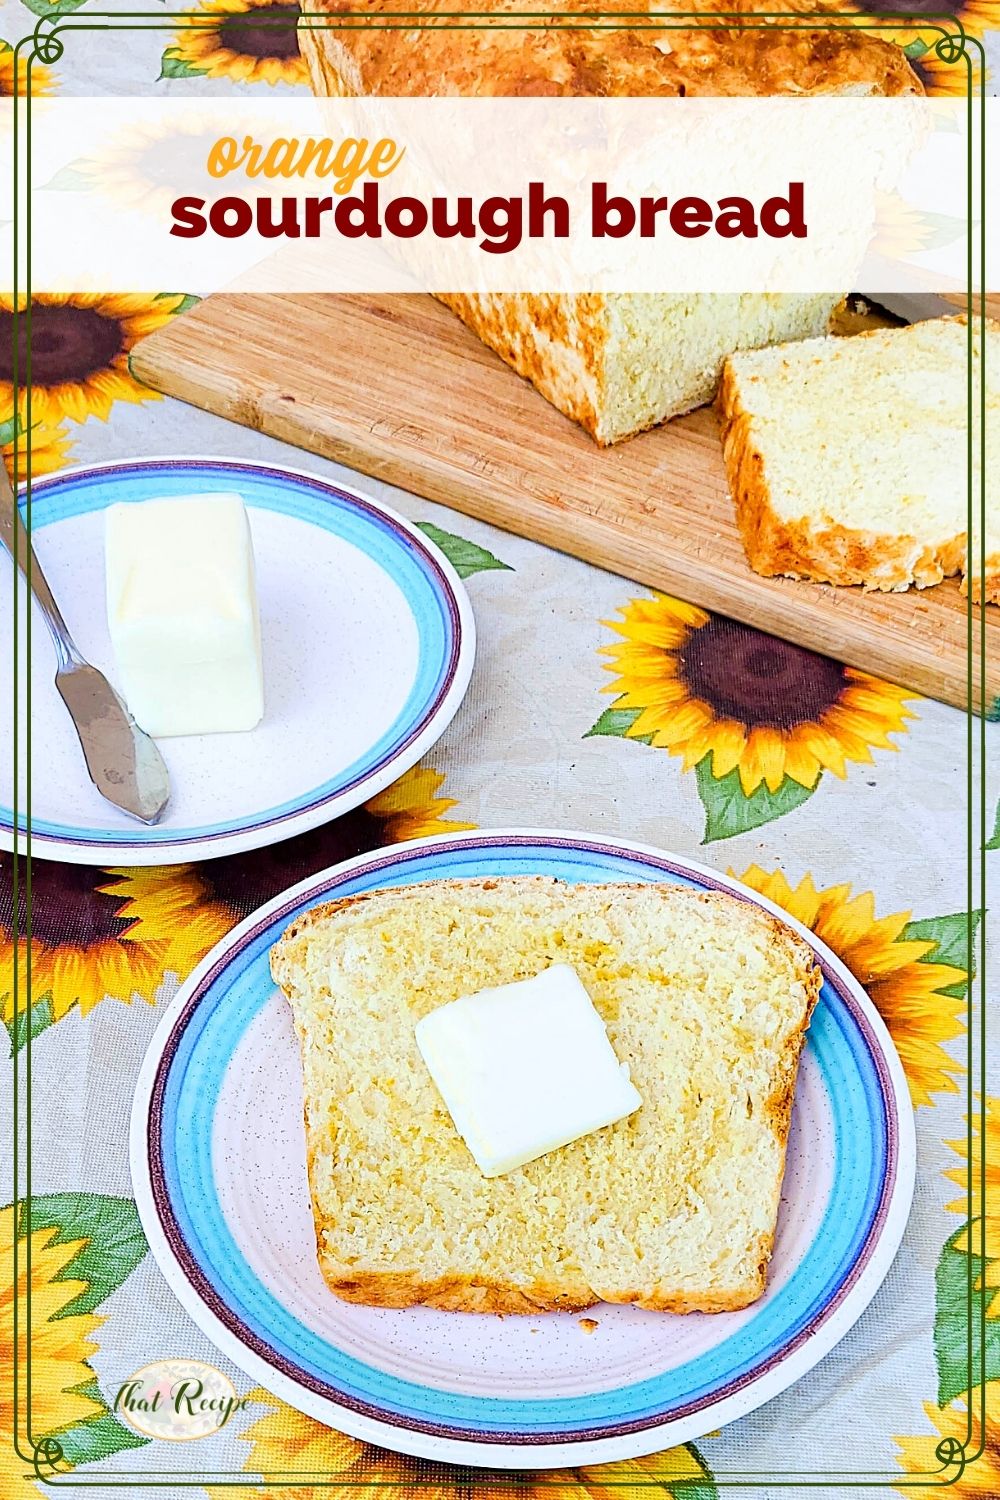 Slice of orange casserole bread with butter with text overlay "sourdough orange bread"